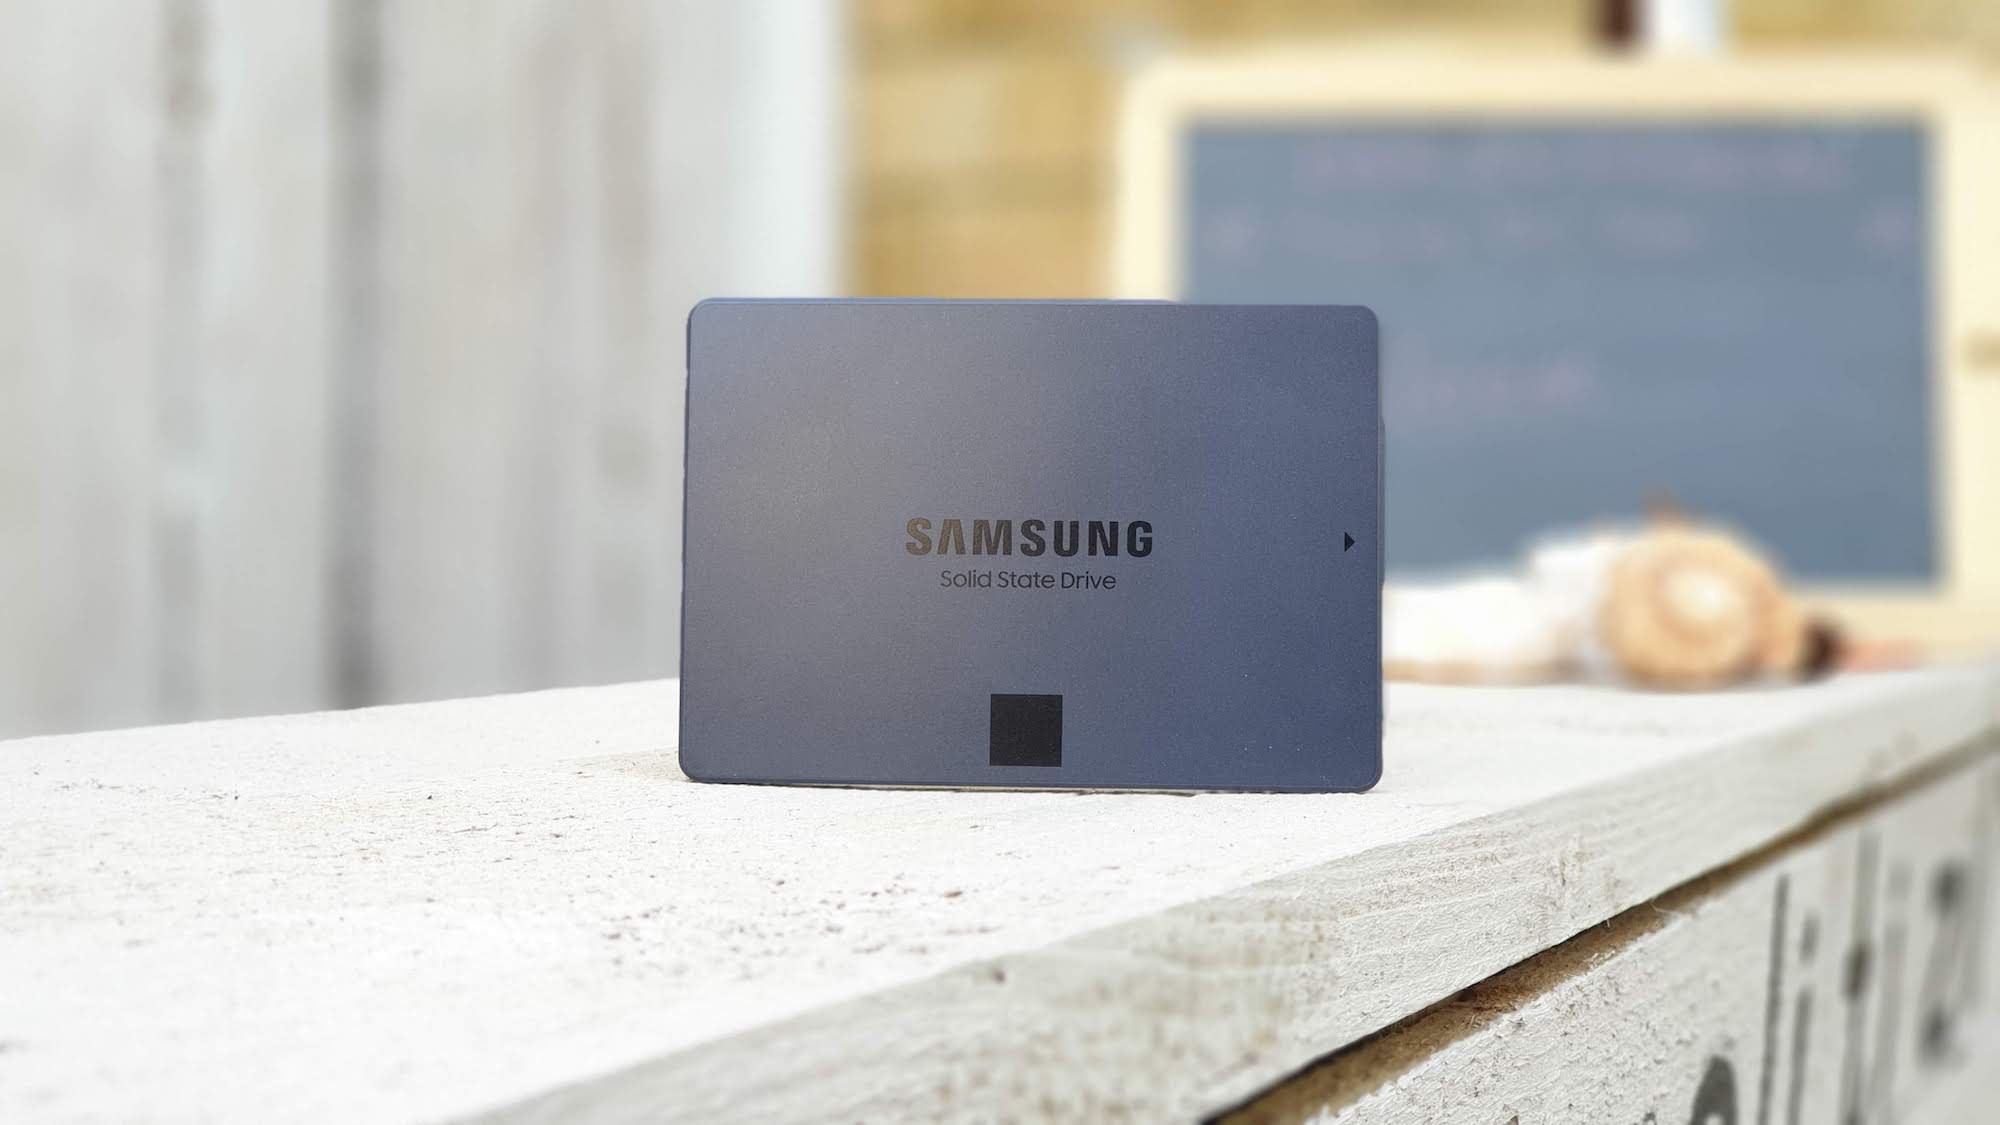 Samsung 860 QVO Terabyte SSD reads at a maximum speed of 560 MB/s